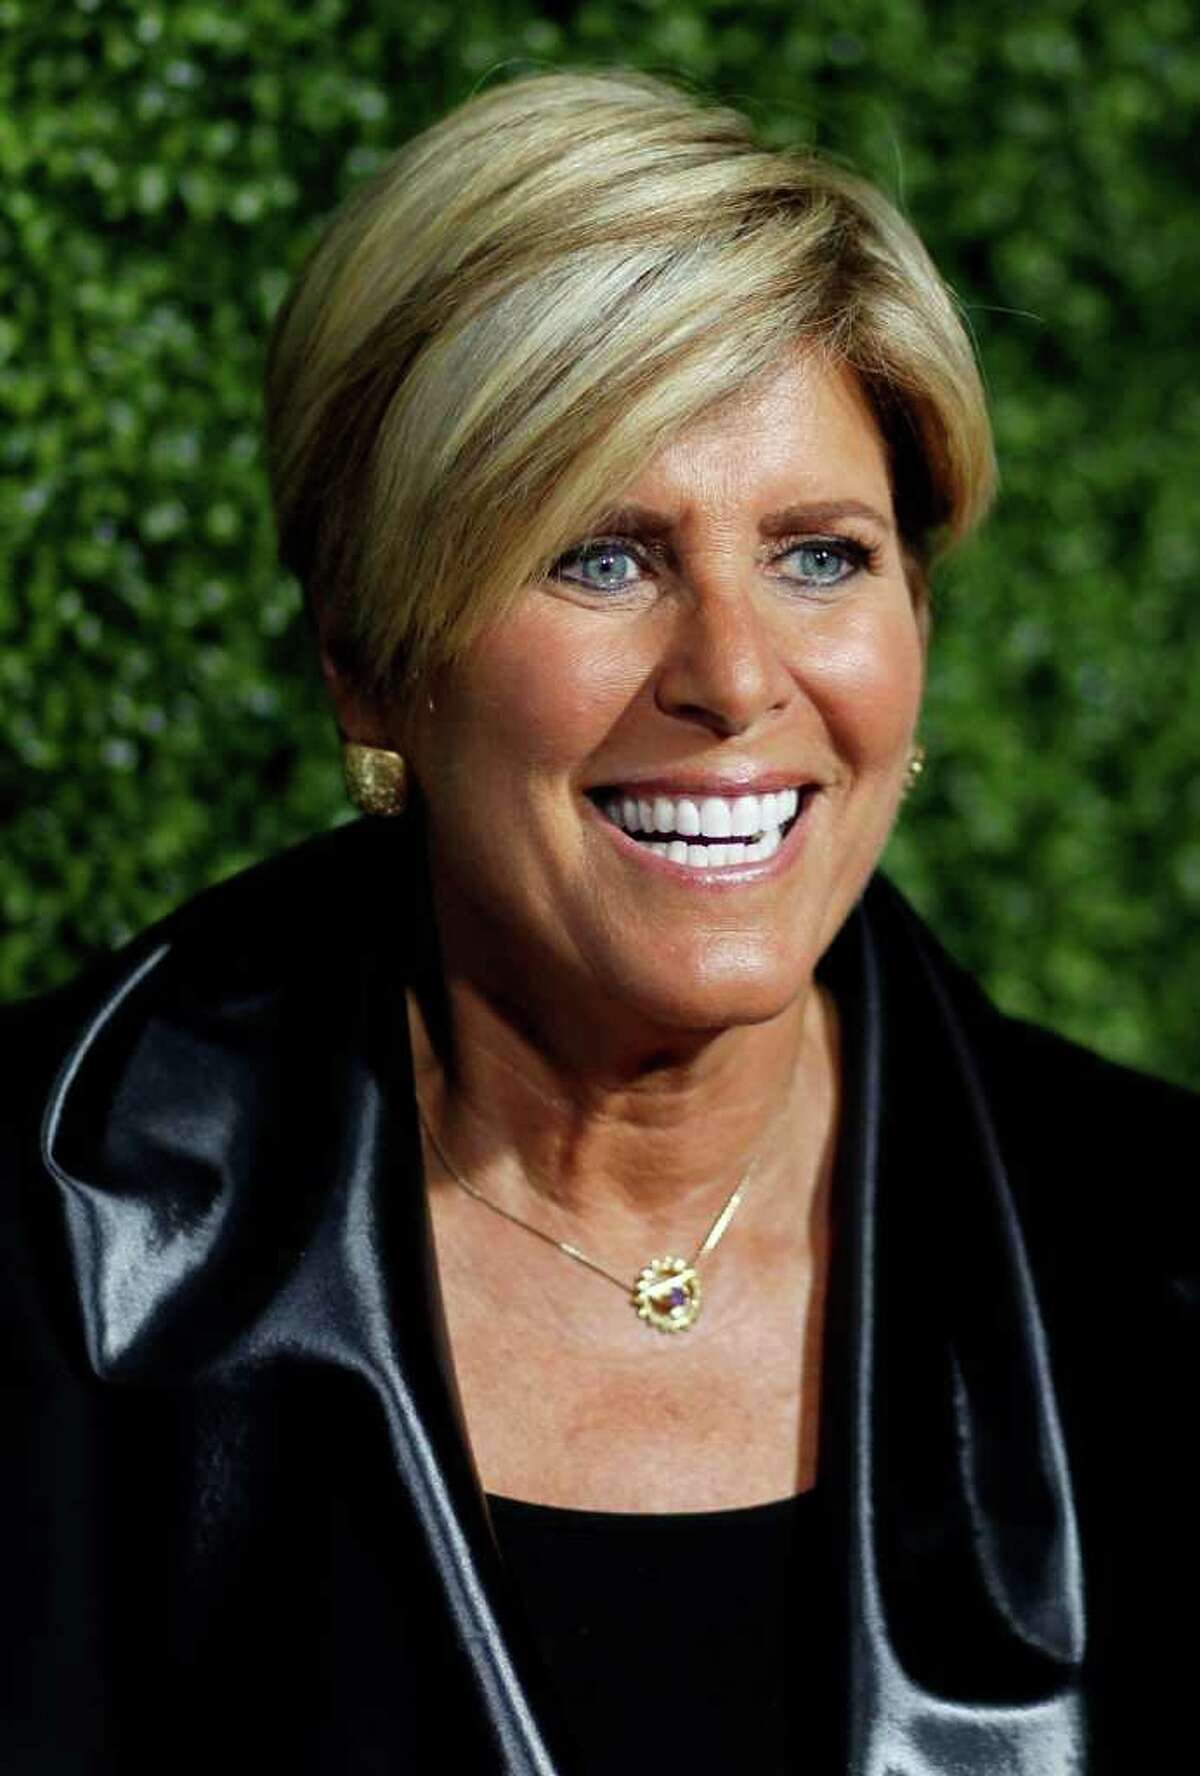 Suze Orman's prepaid card costs $3 to obtain, and then $3 a month.